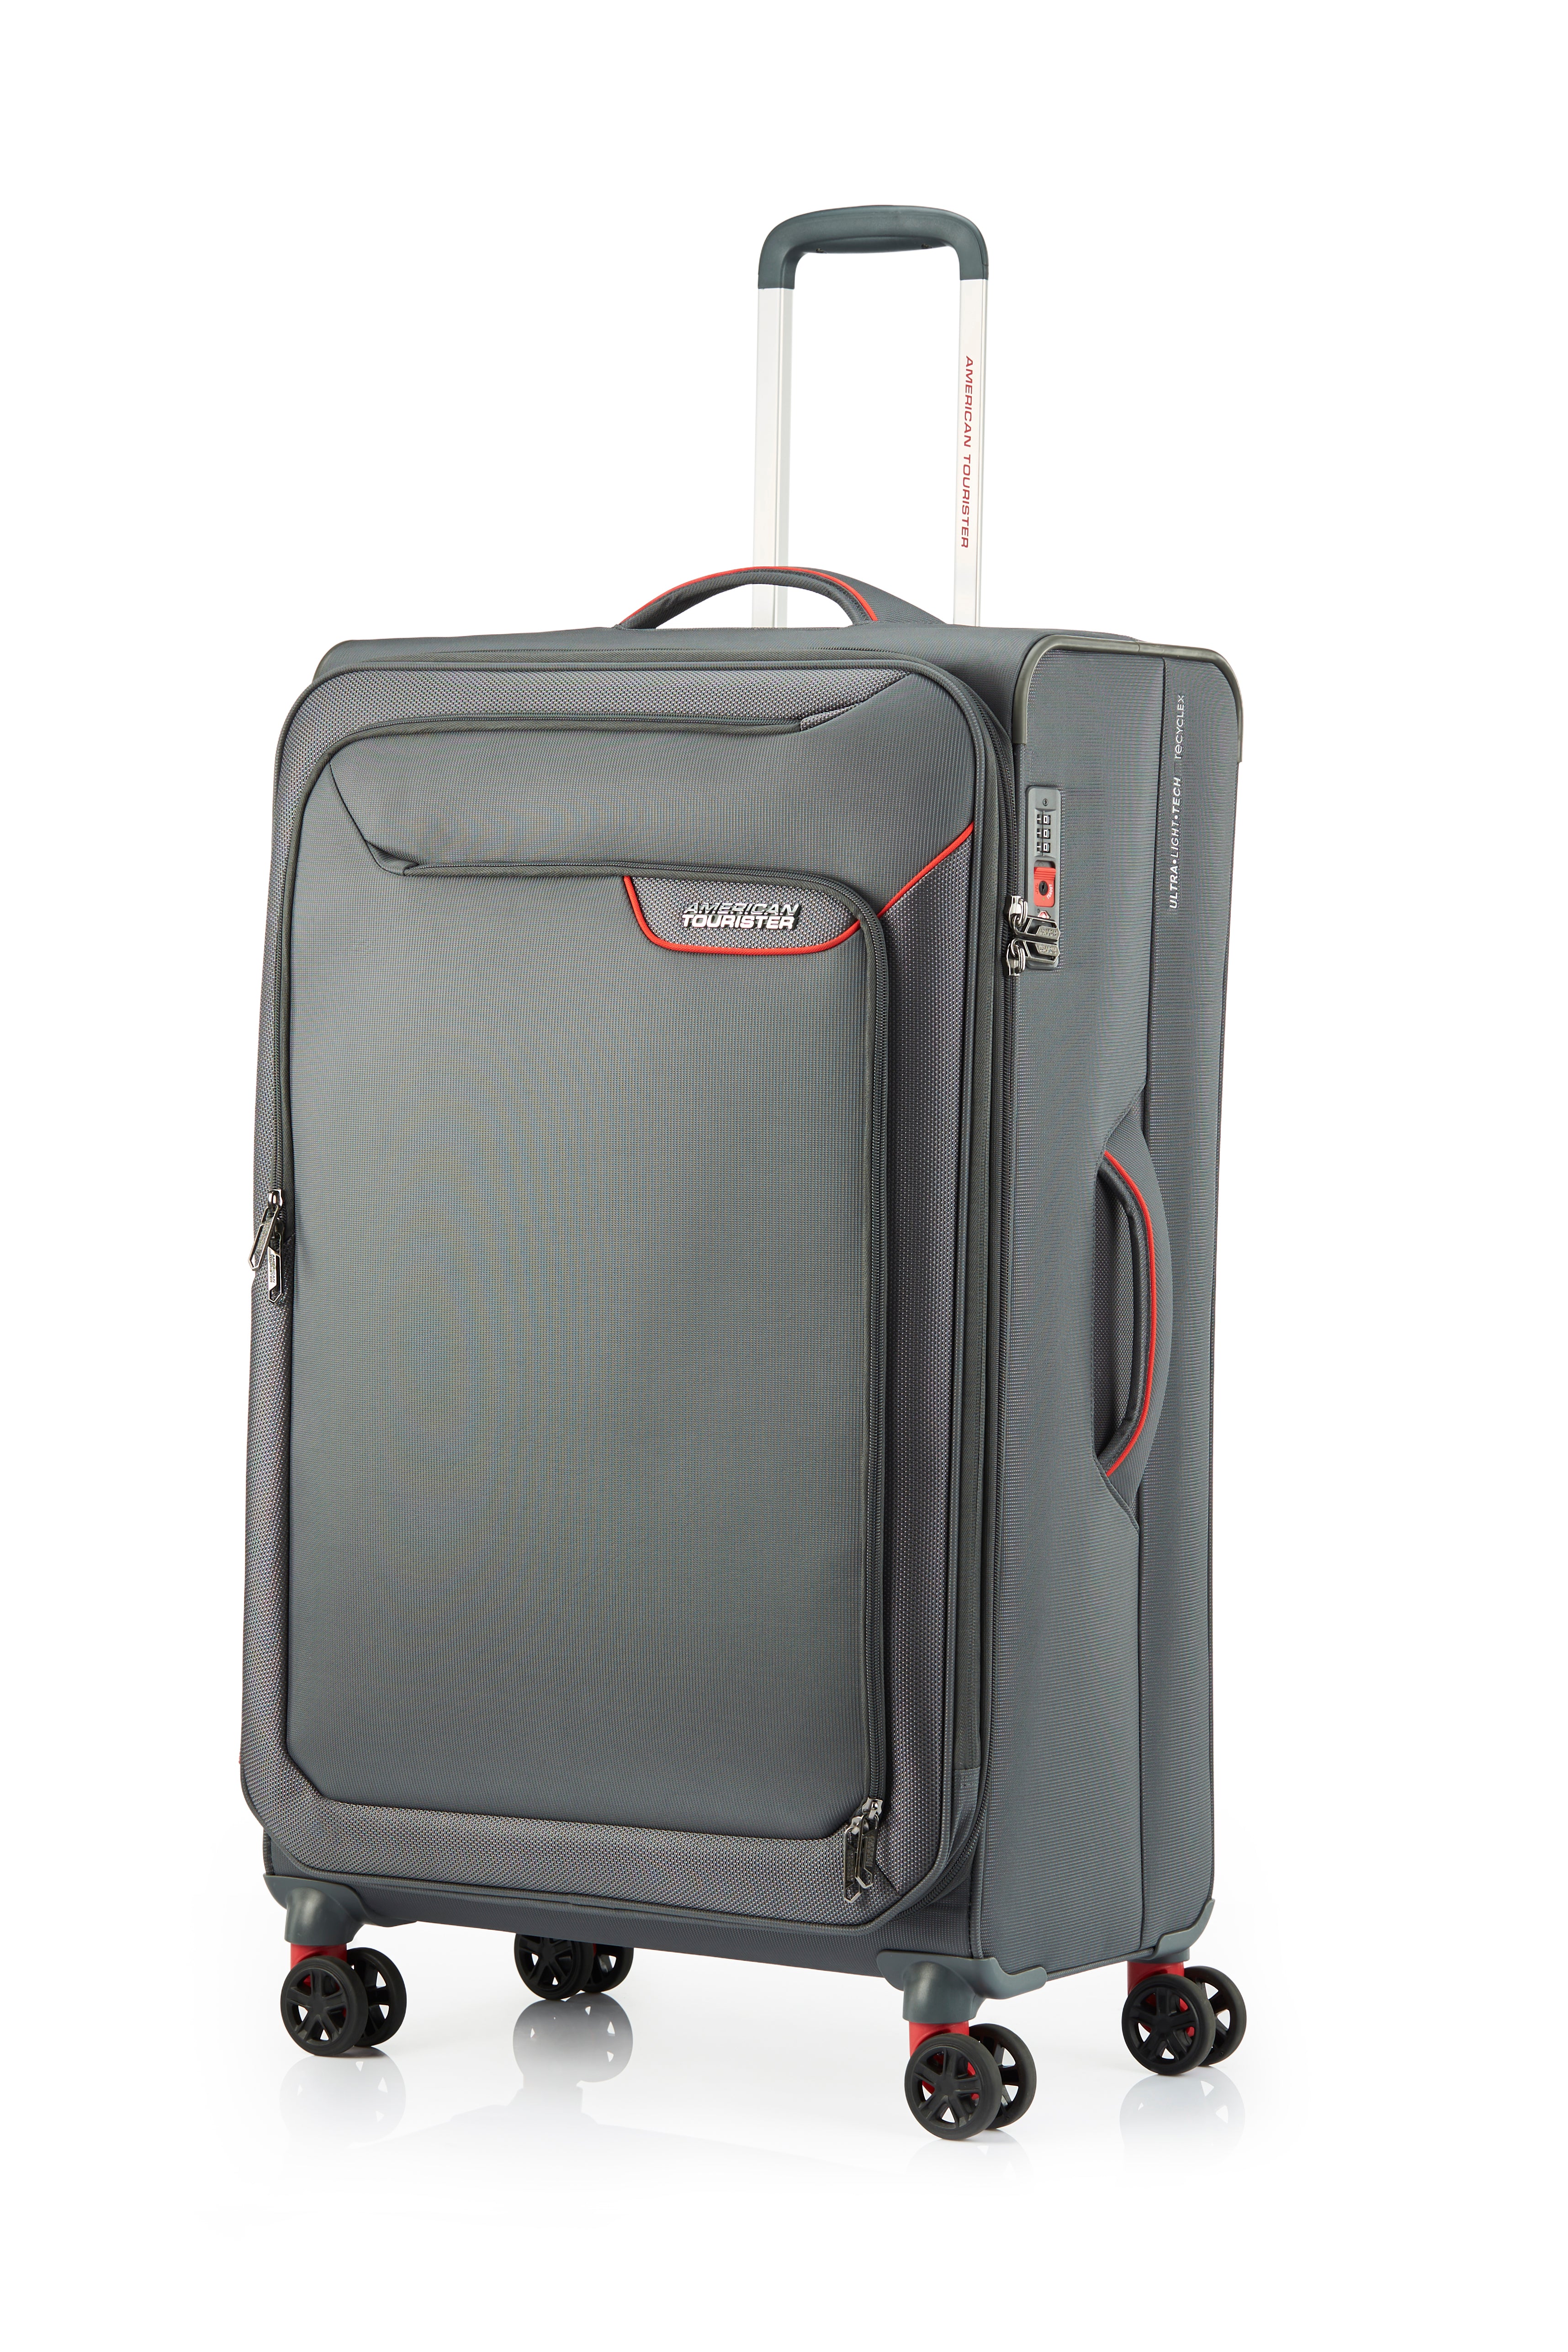 American Tourister - Applite ECO 82cm Large Suitcase - Grey/Red-1